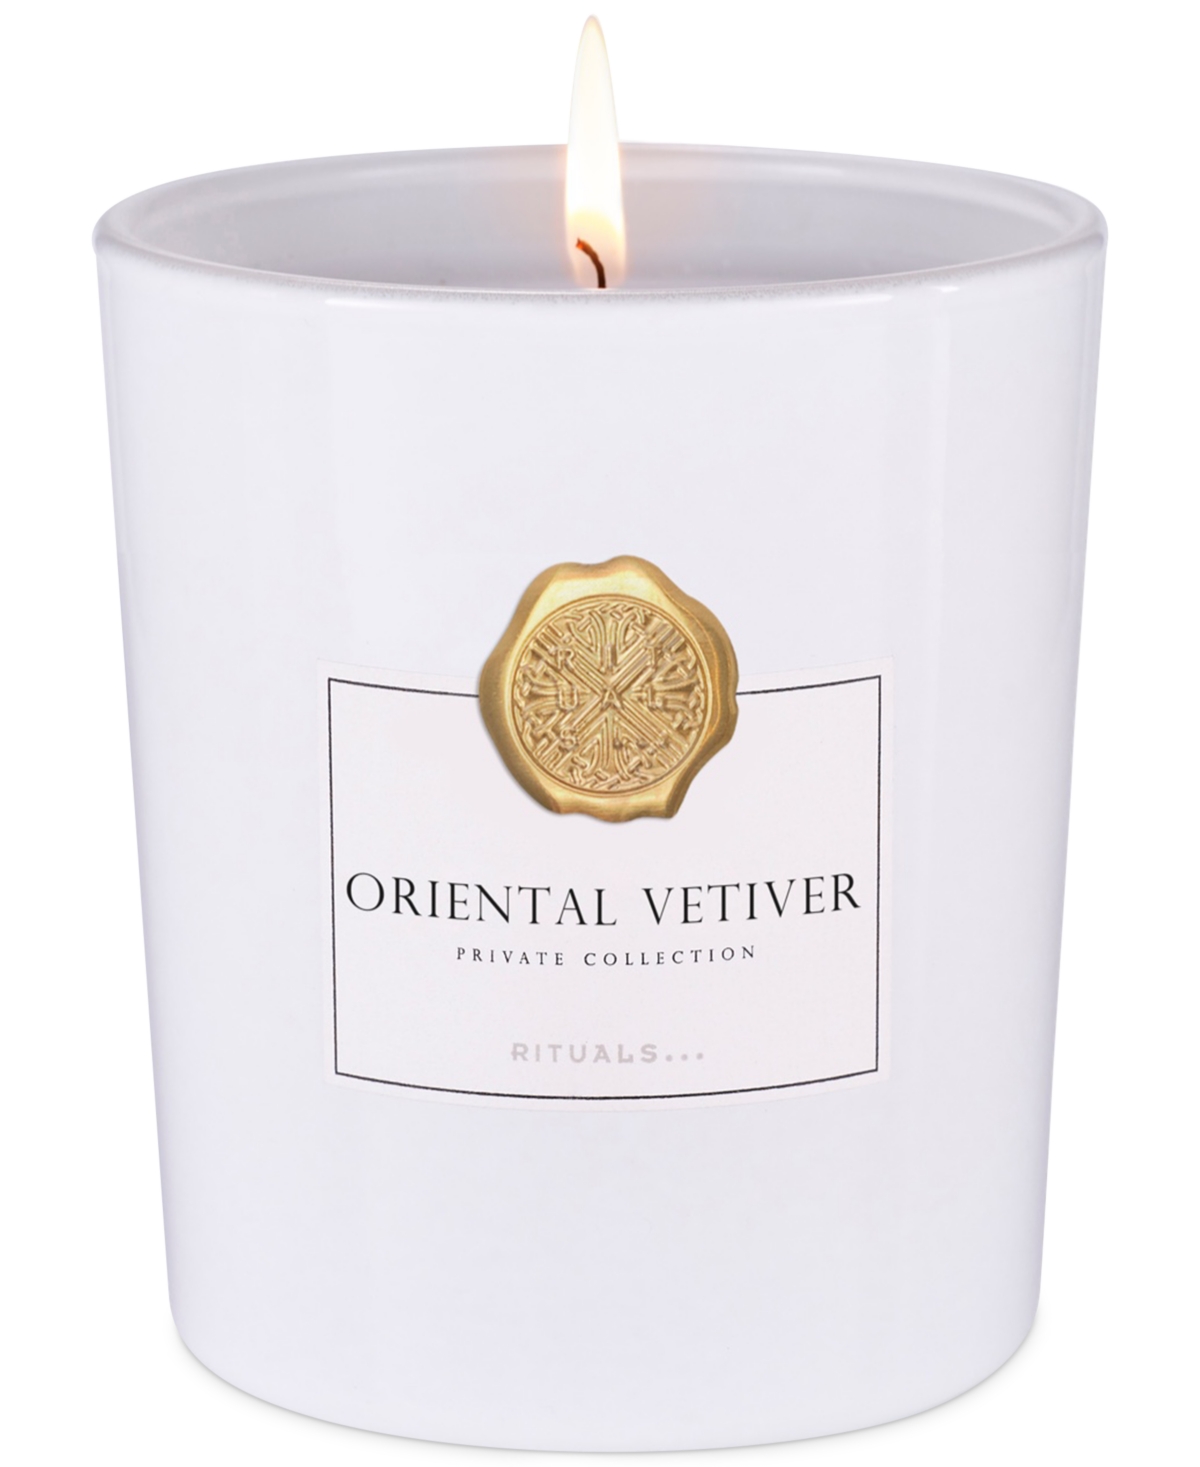 Rituals Oriental Vetiver Scented Candle, 12.6-oz.